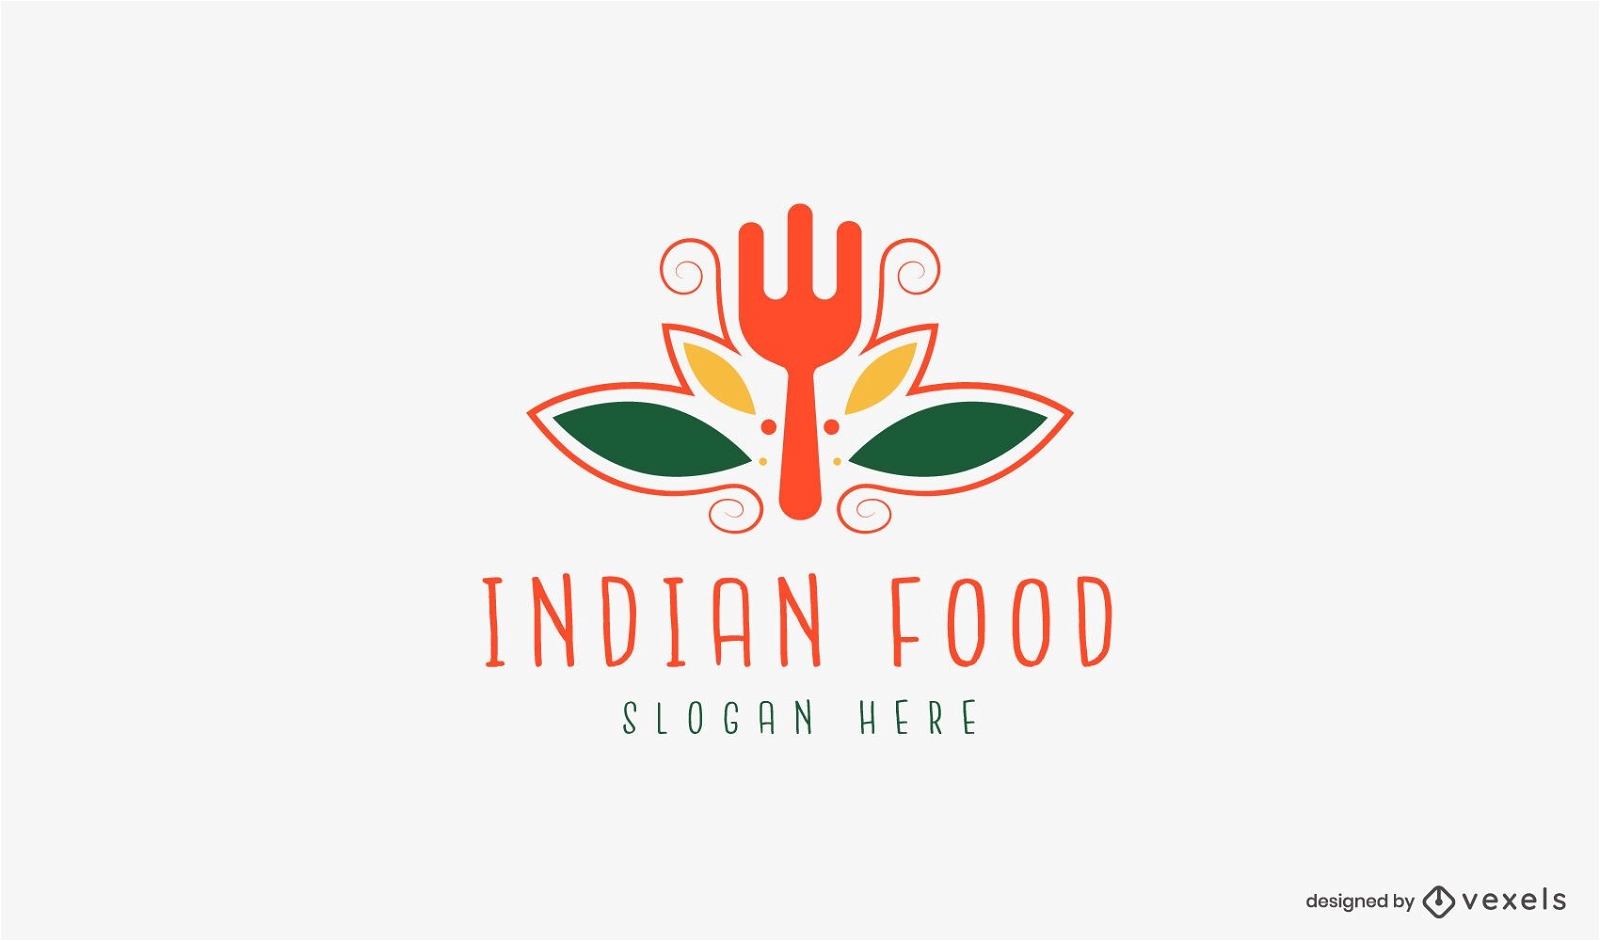 Indian Food Logos Stock Vector Illustration and Royalty Free Indian Food  Logos Clipart